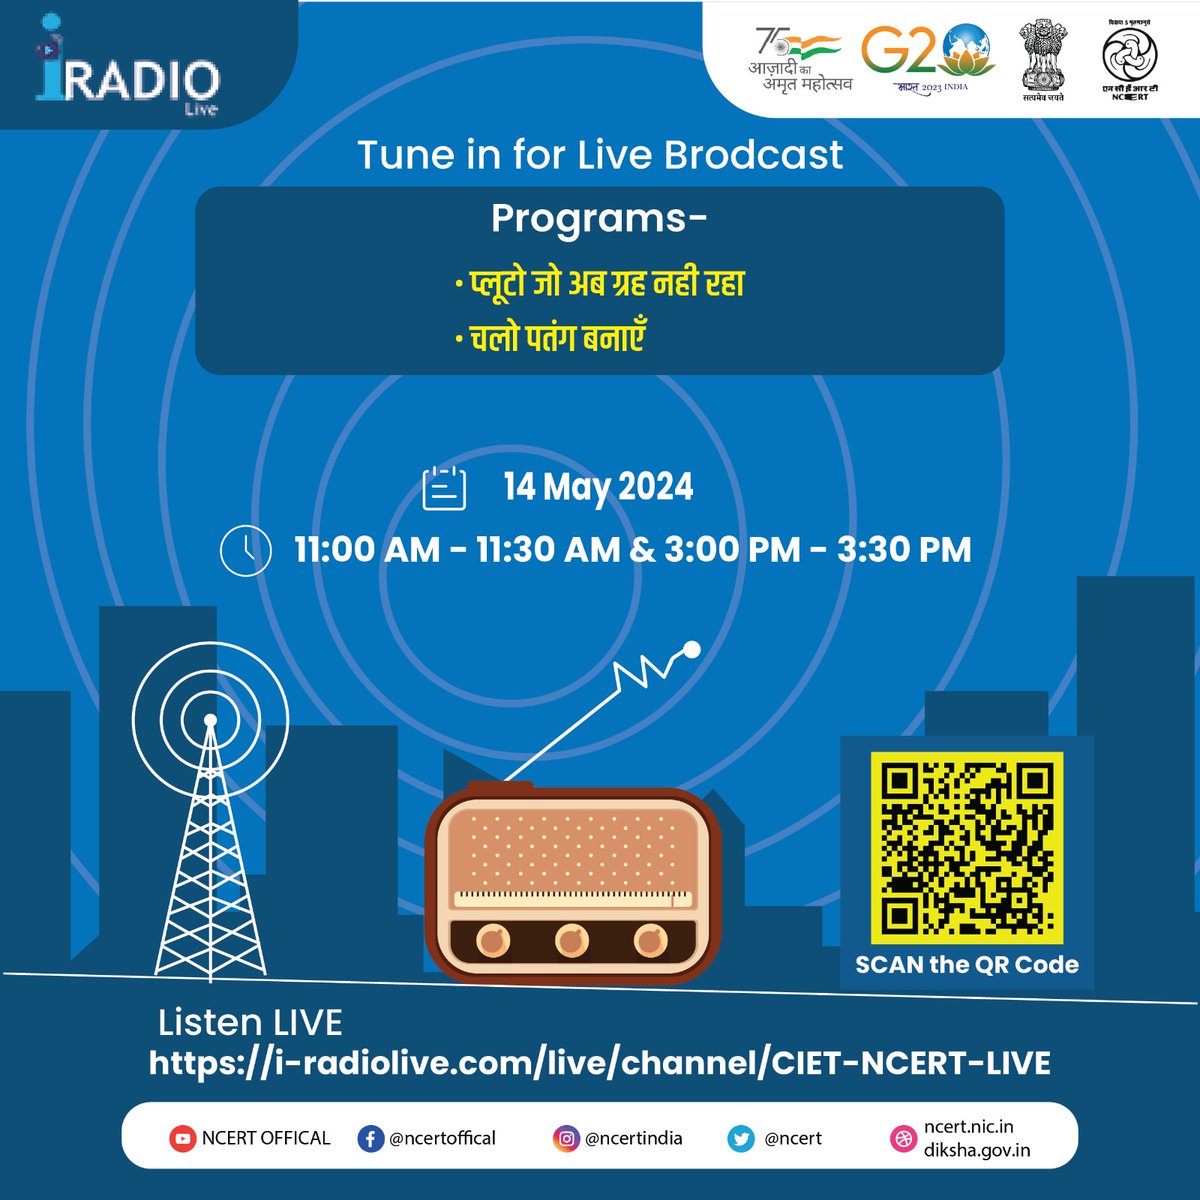 🎙️ Tune in to iRadio Live for a dose of insightful content! Don’t miss out on our engaging discussions and vibrant program. Join us every Monday to Friday, timings 11:00 AM to 11:30 AM & 3:00 PM to 3:30 PM (IST). Mark your calendars and listen live at i-radiolive.com/live/channel/C…